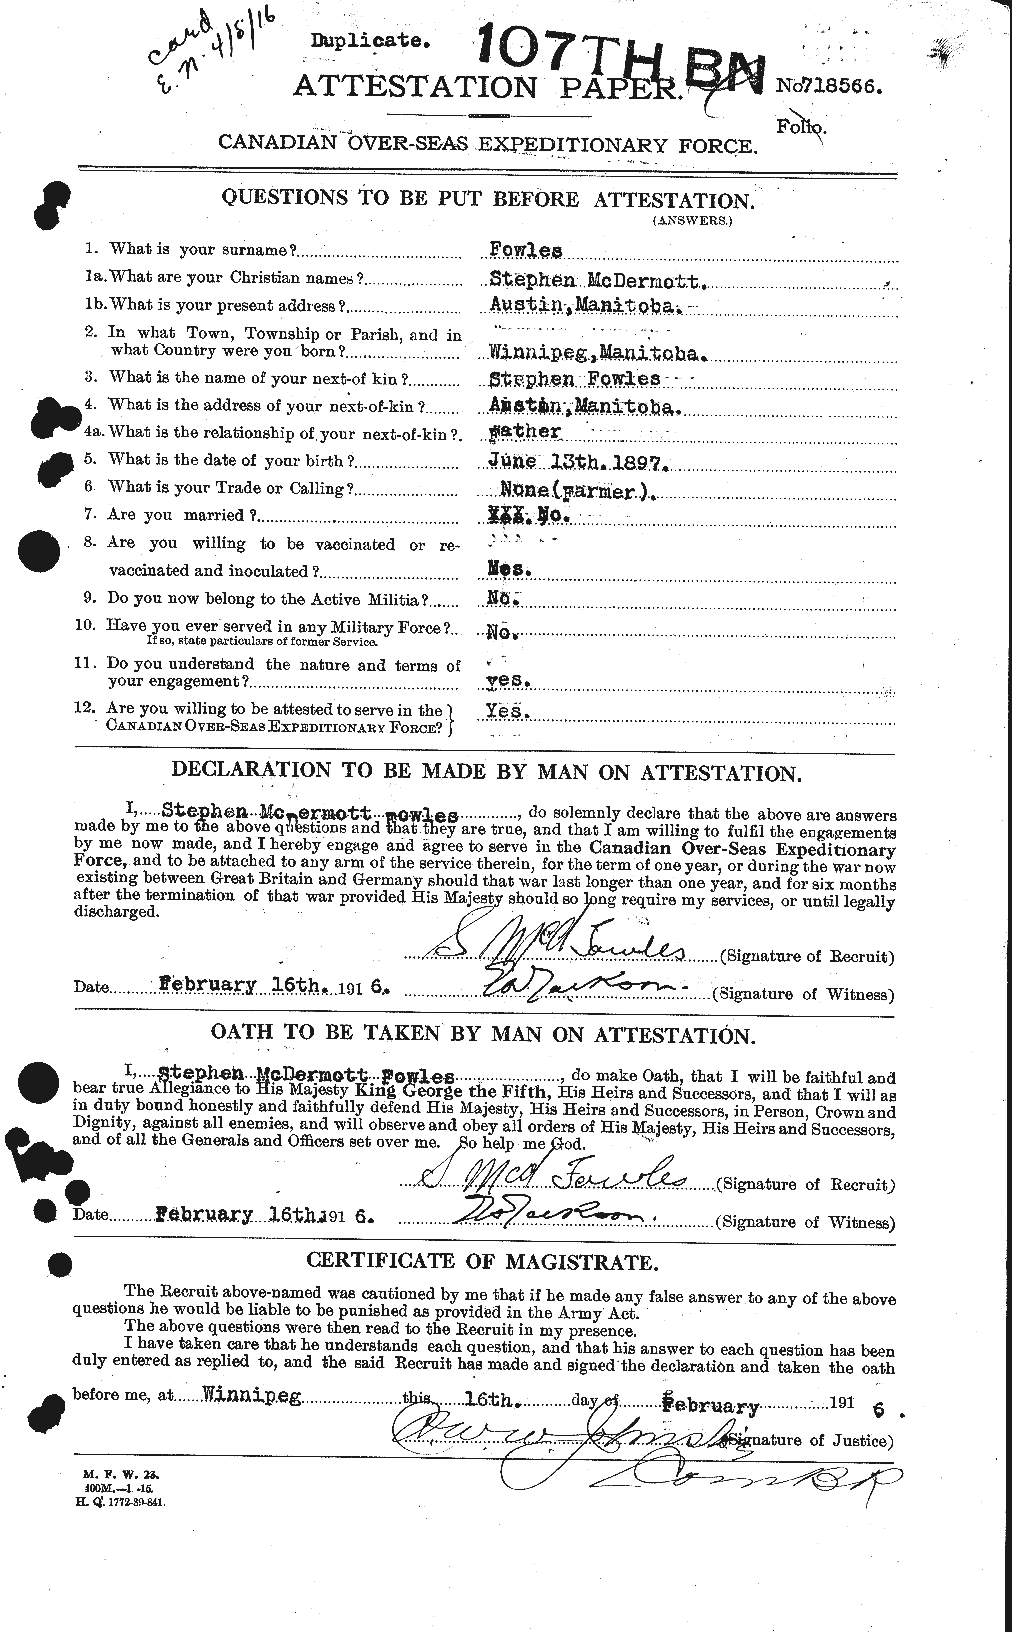 Personnel Records of the First World War - CEF 338647a